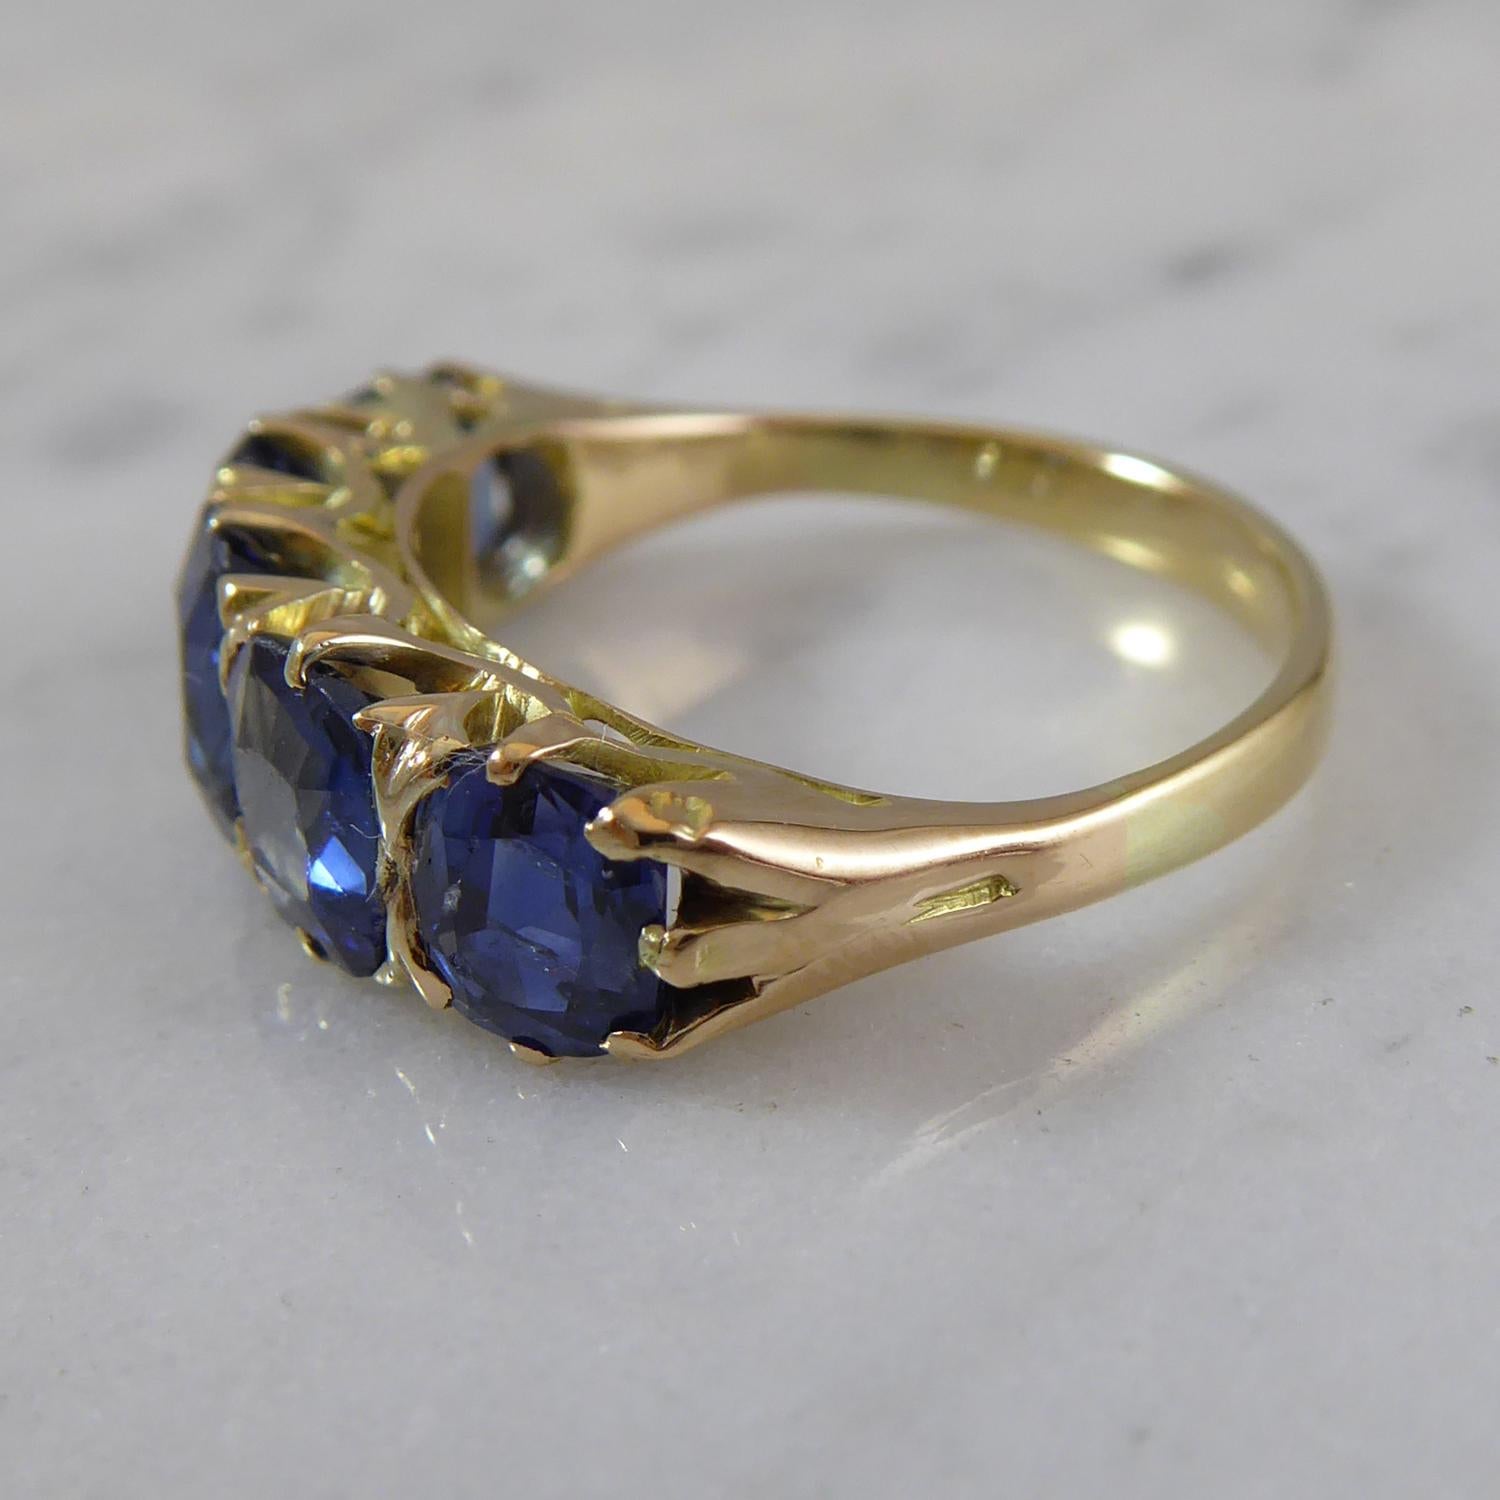 Mixed Cut Antique Victorian Sapphire Ring, Yellow Gold